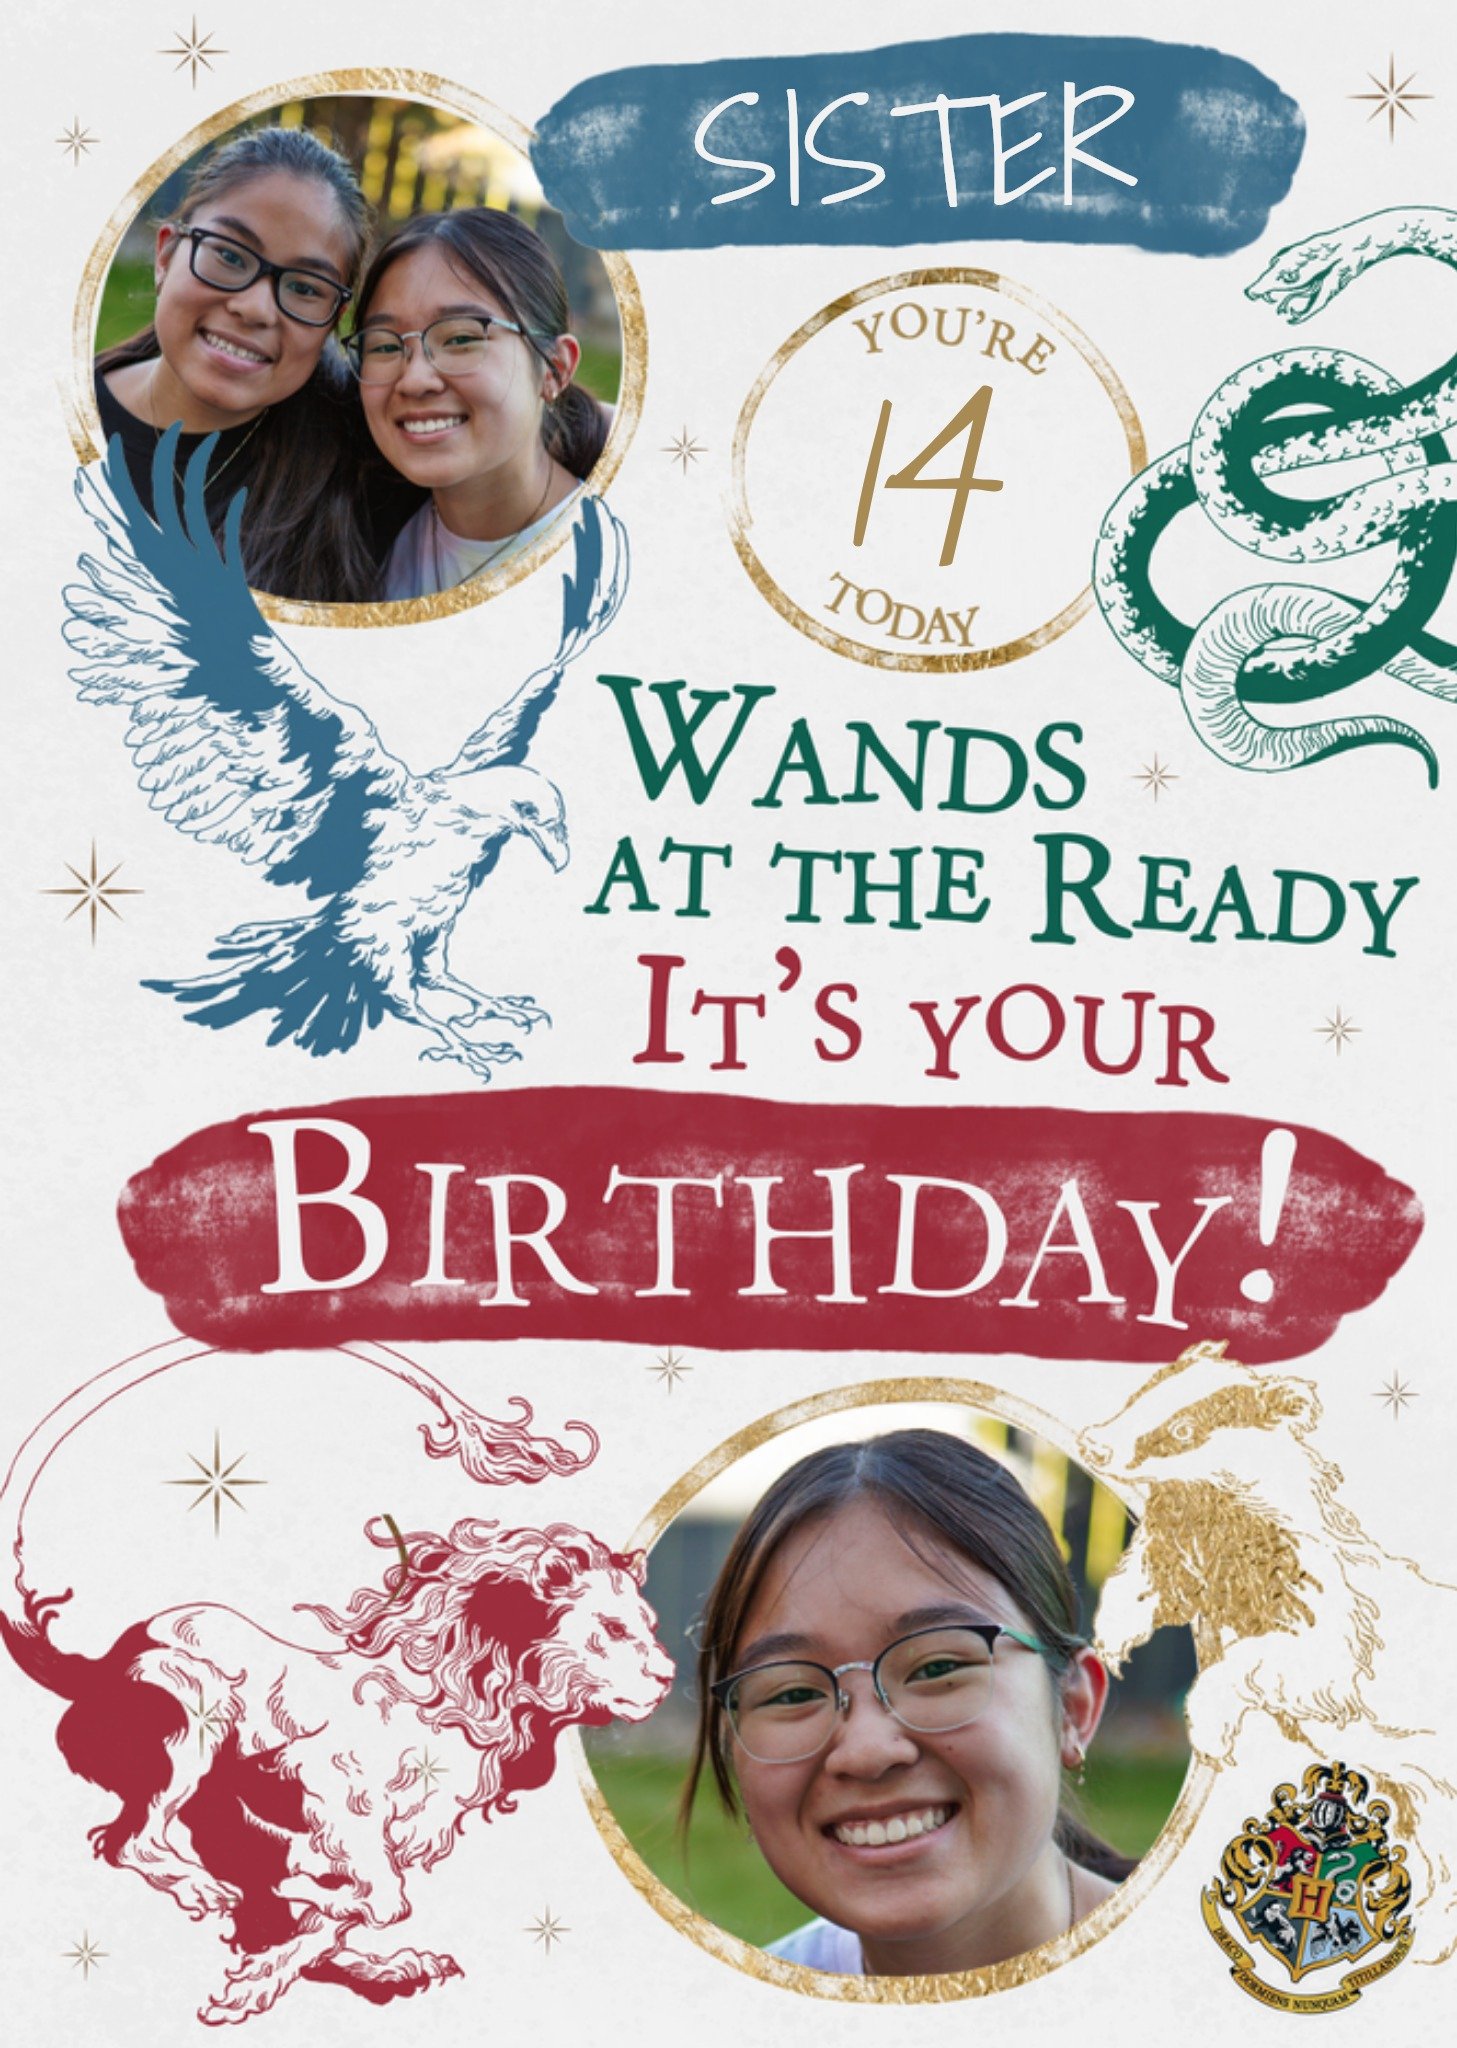 Harry Potter Wands At The Ready Photo Upload Birthday Card, Large